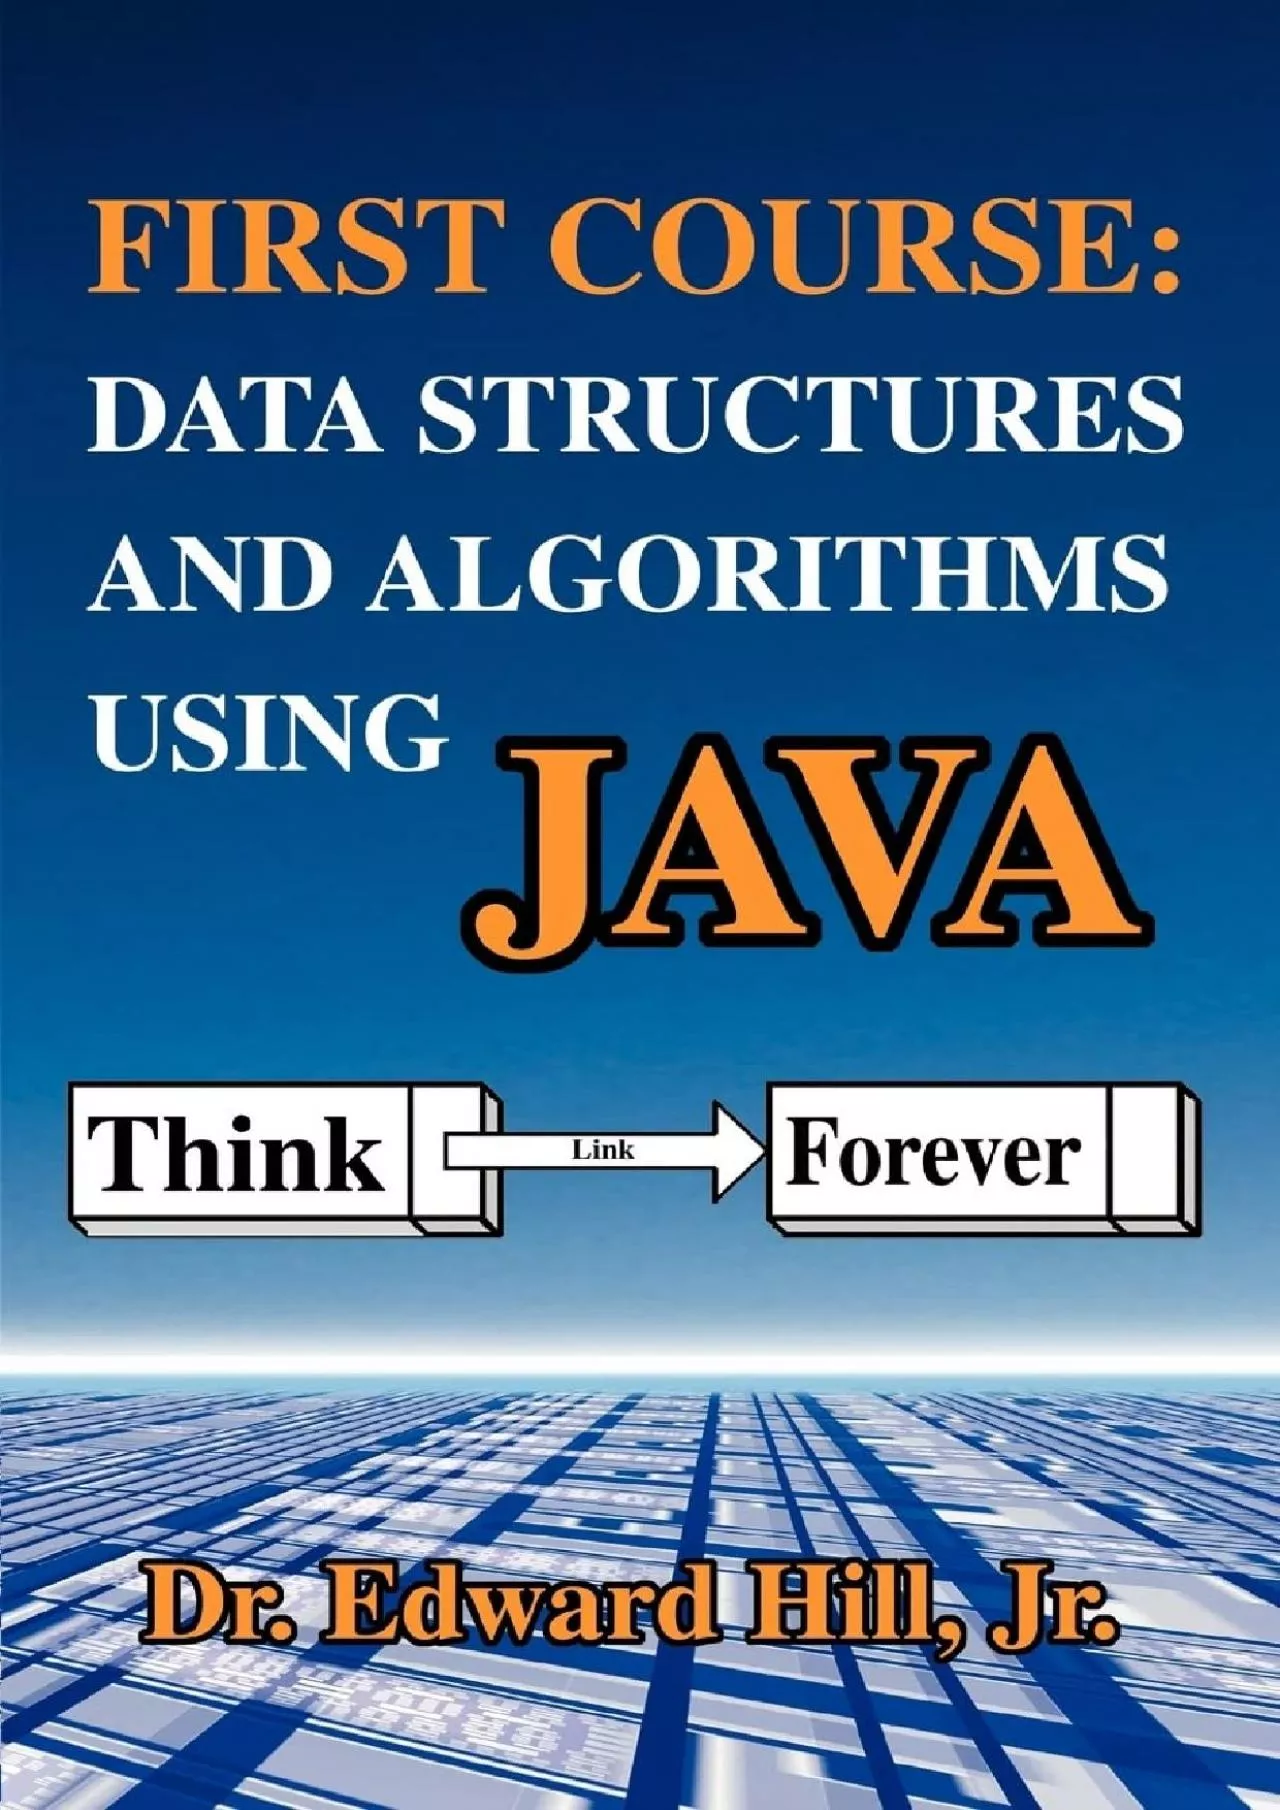 [DOWLOAD]-First Course Data Structures and Algorithms Using Java Data Structures and Algorithms